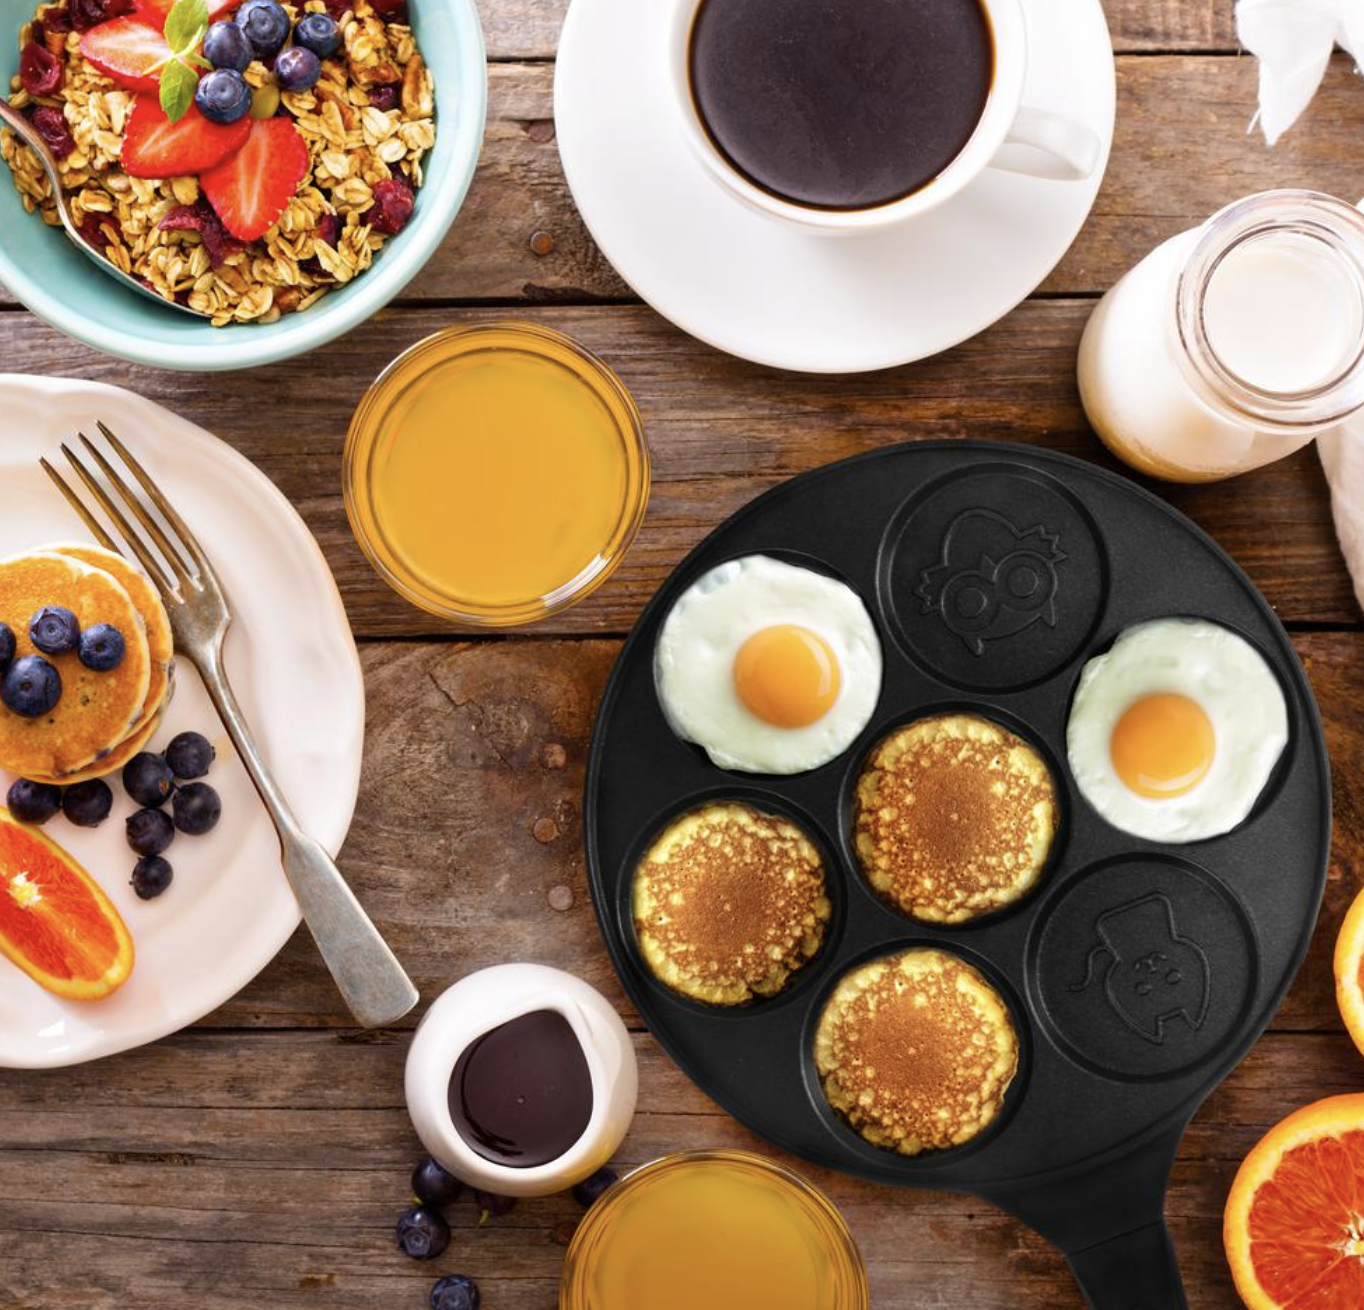 11 Affordable Kitchen Tools That Practically Make Your Breakfast for You